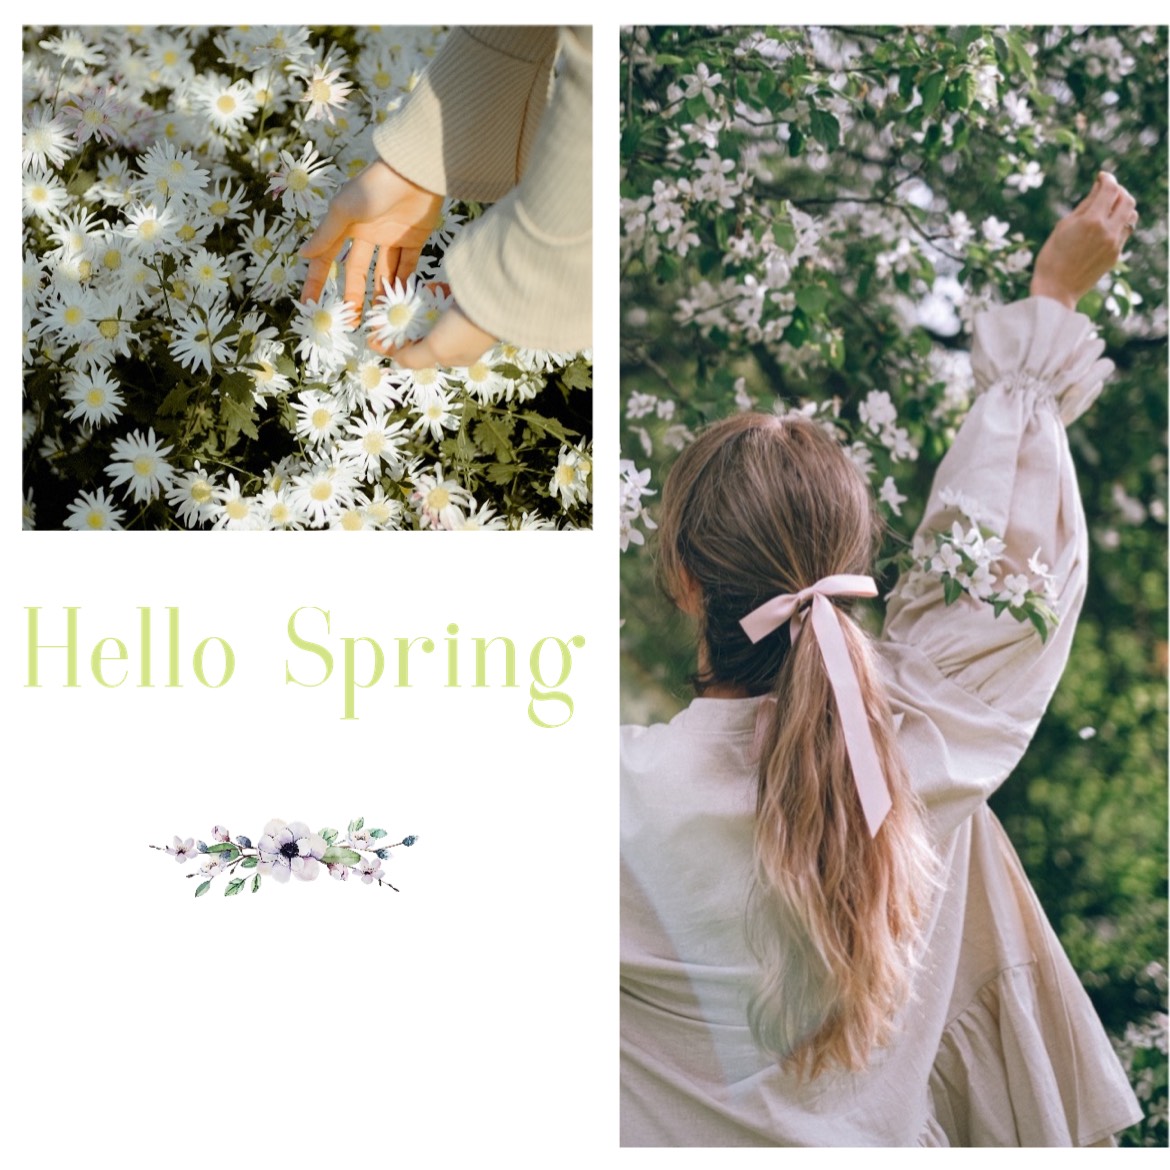 A Collage Of Photos With A Girl In A Dress And Flowers Hello Spring Template